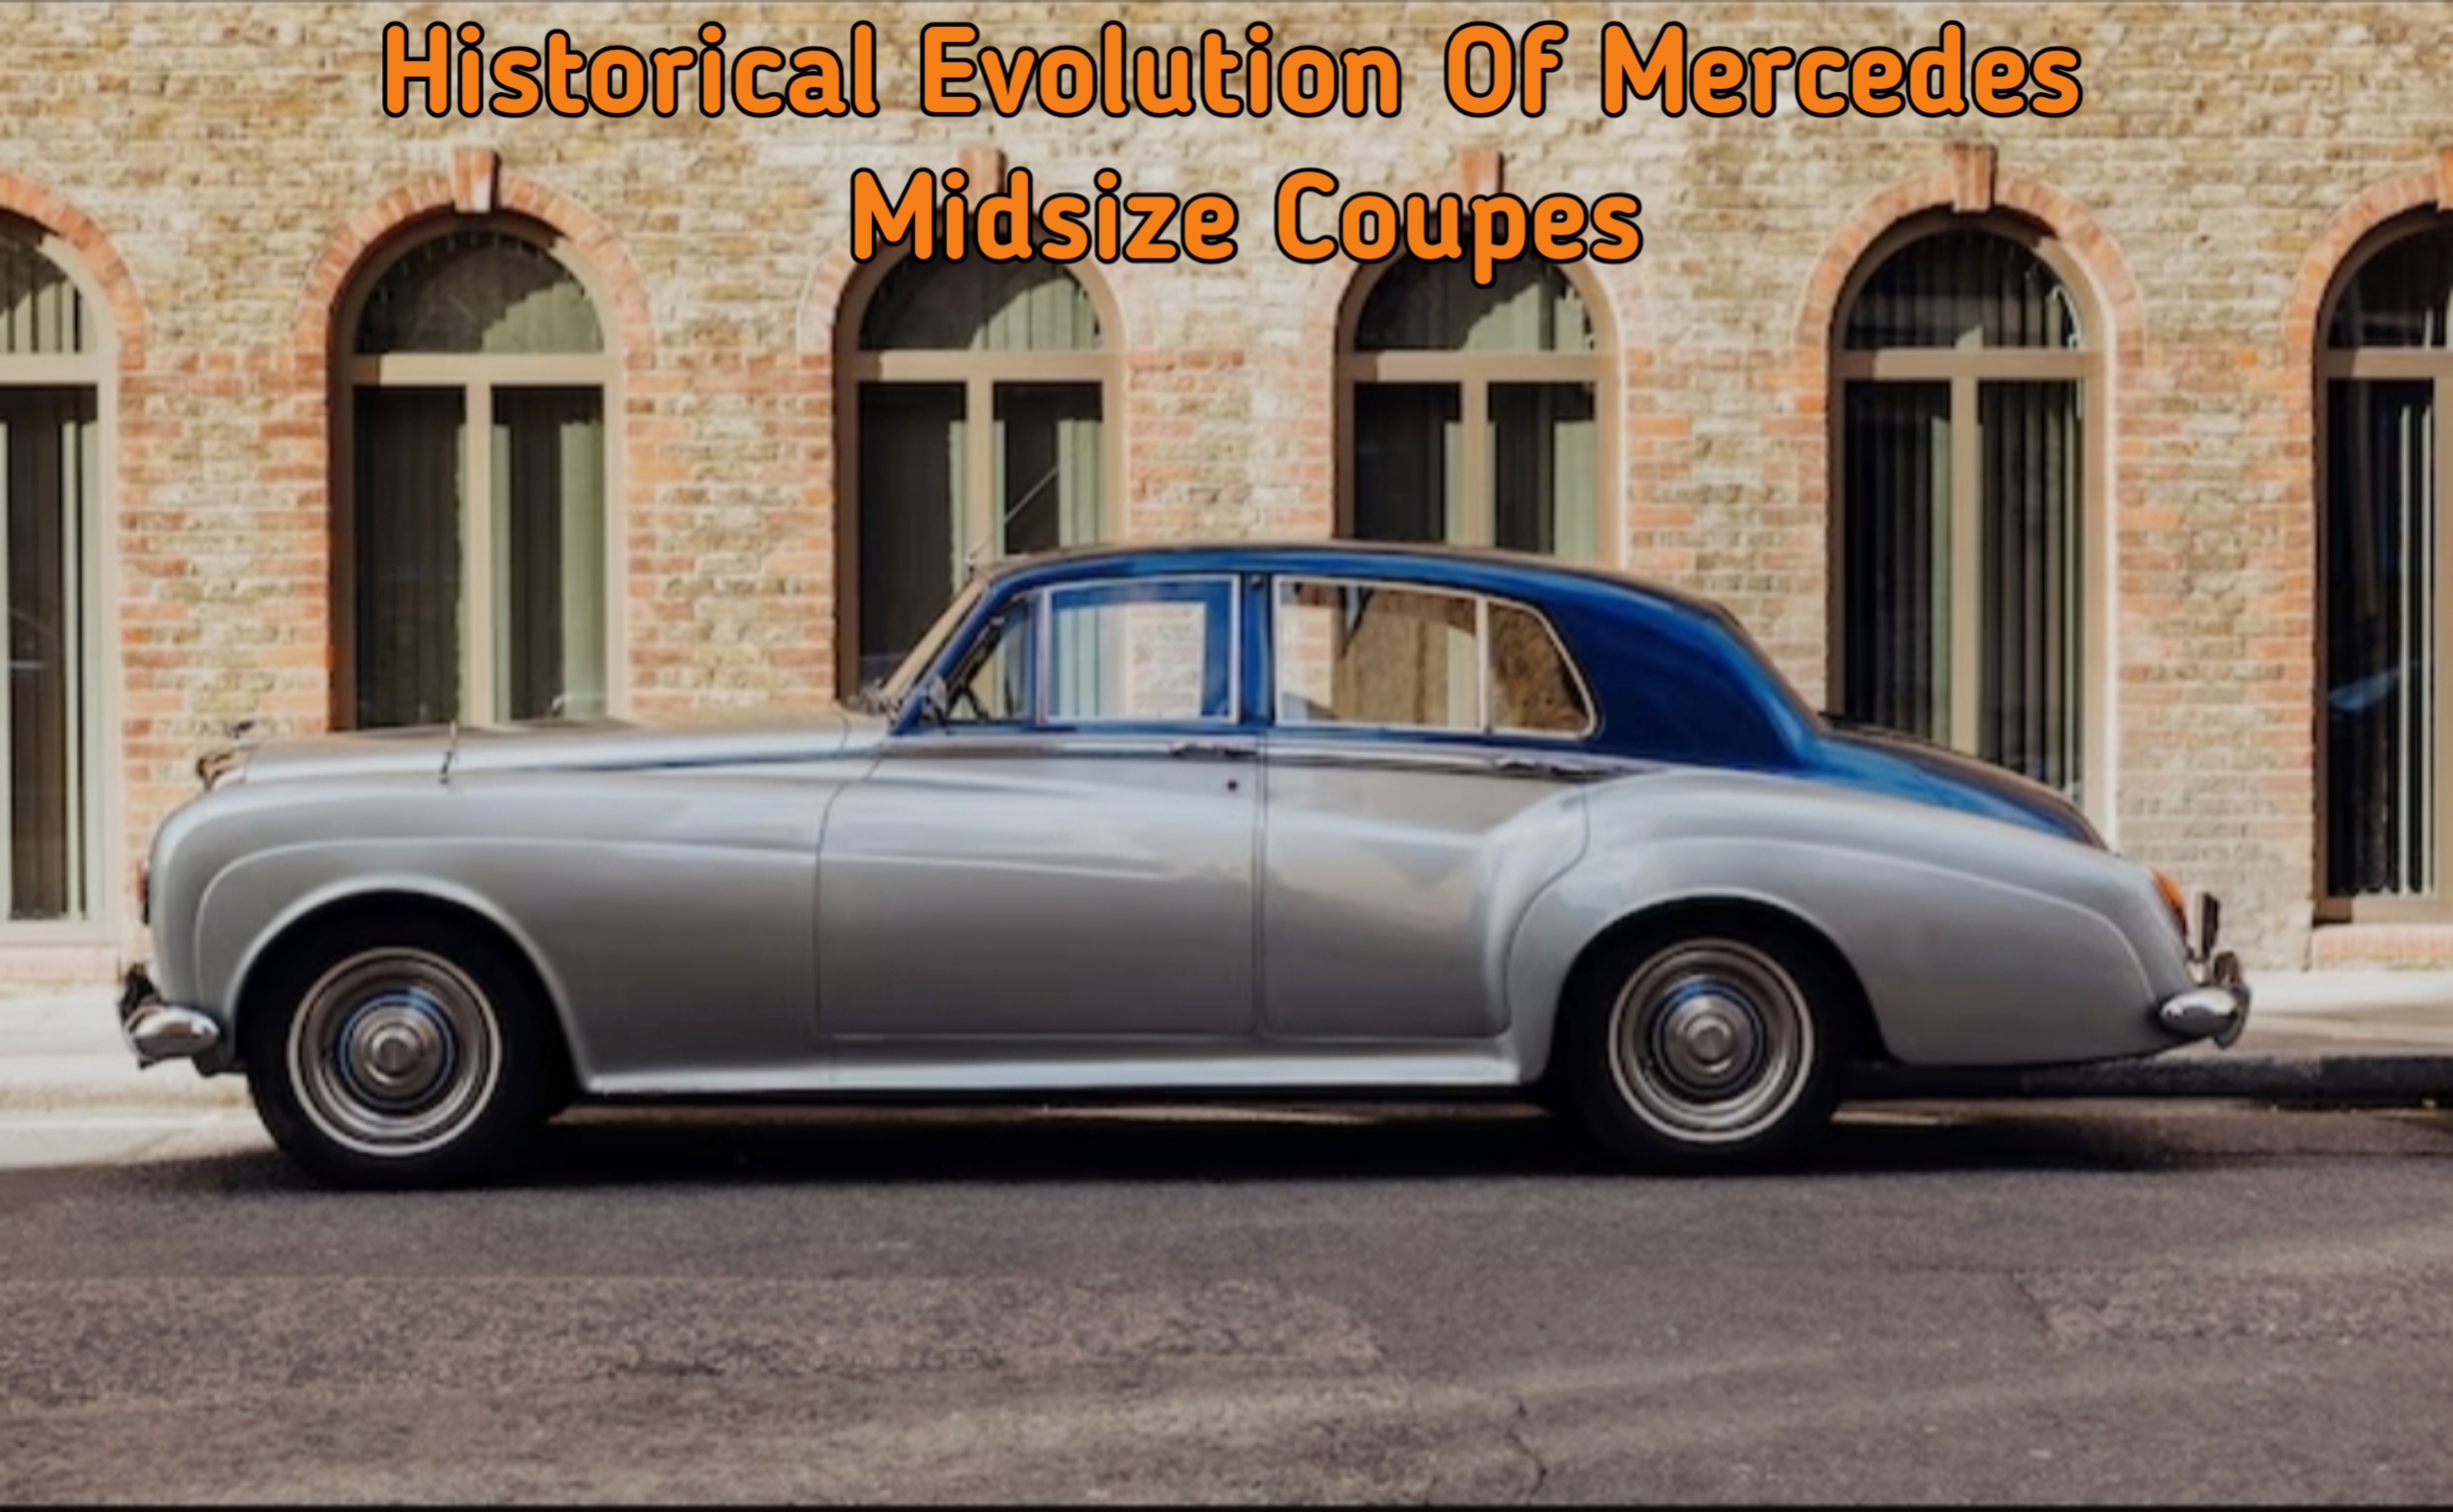 class of midsize luxury coupes from mercedes